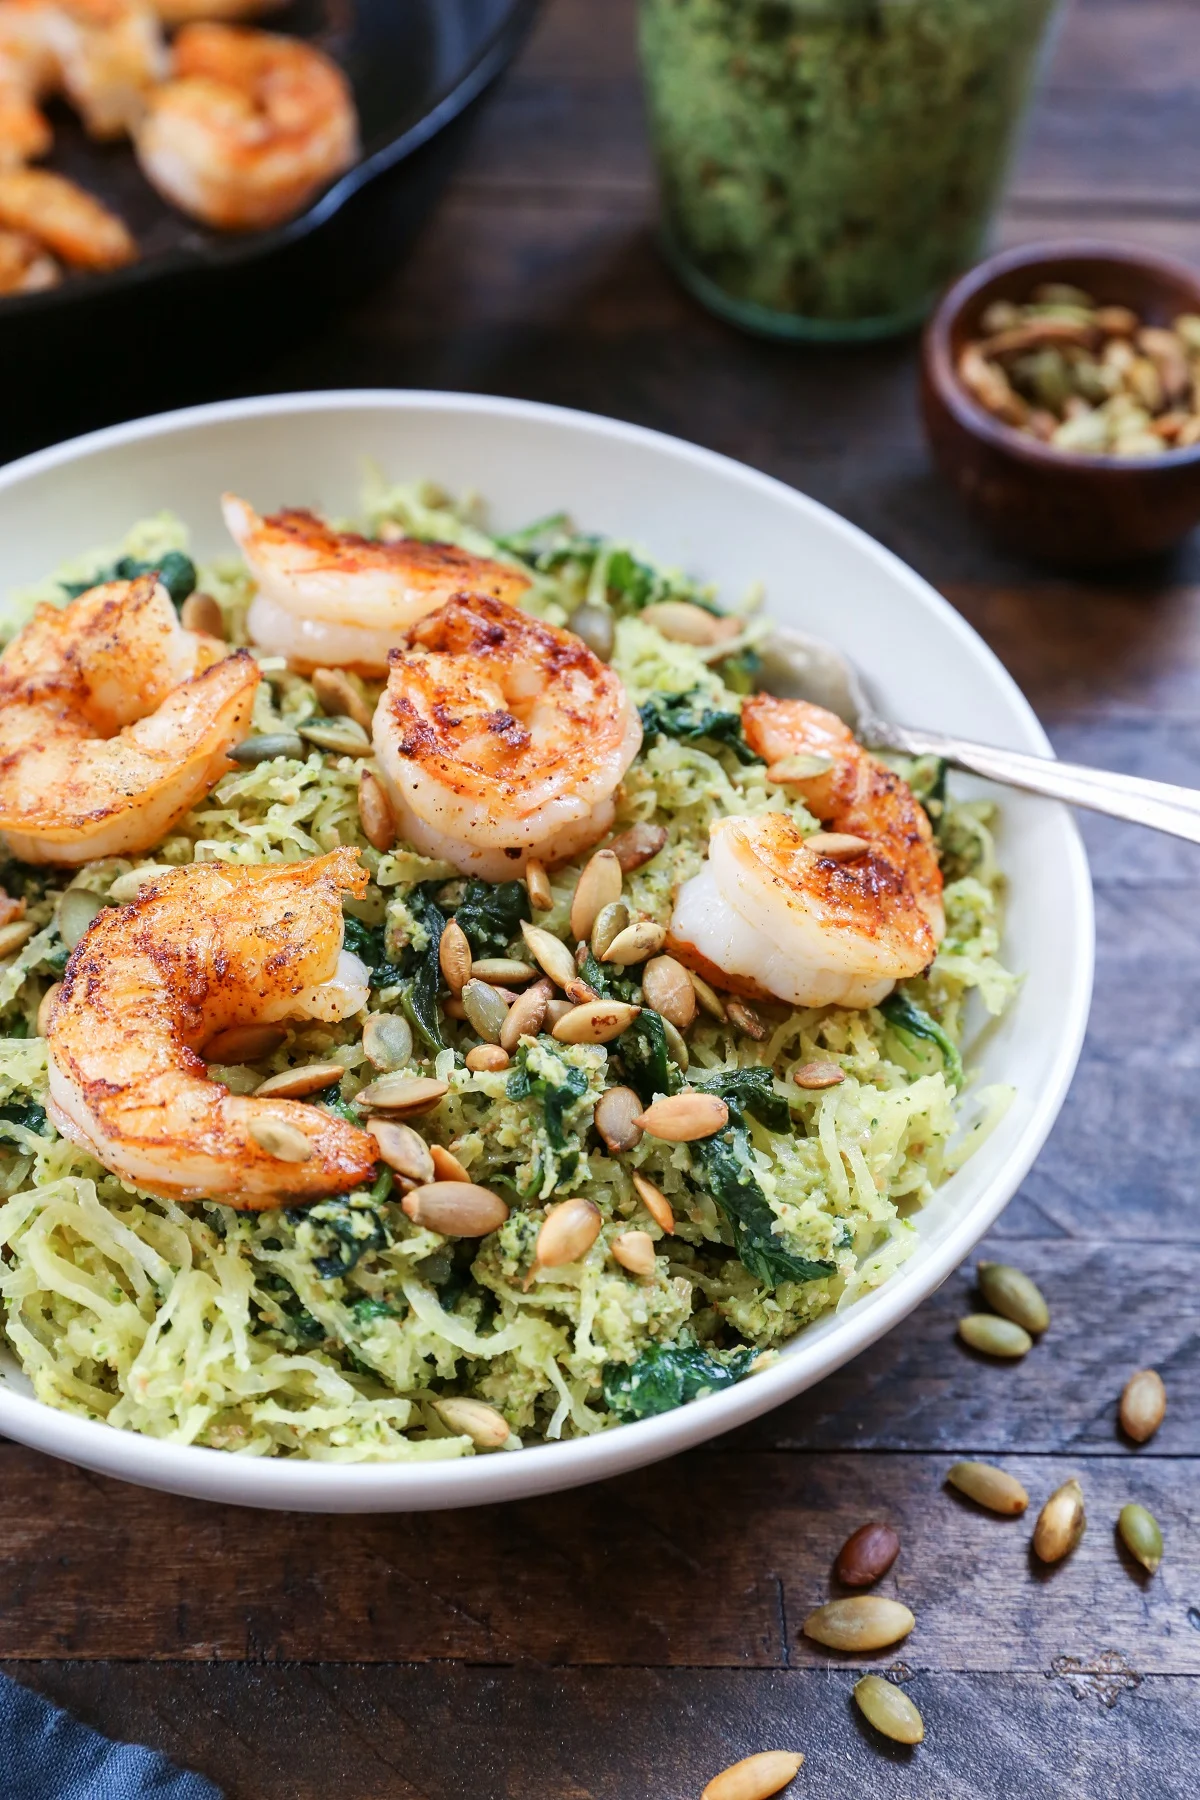 Spaghetti Squash with Sauteed Shrimp and Parsley Pesto - a gluten-free, paleo-friendly whole30 dinner recipe packed with nutrients #lowcarb